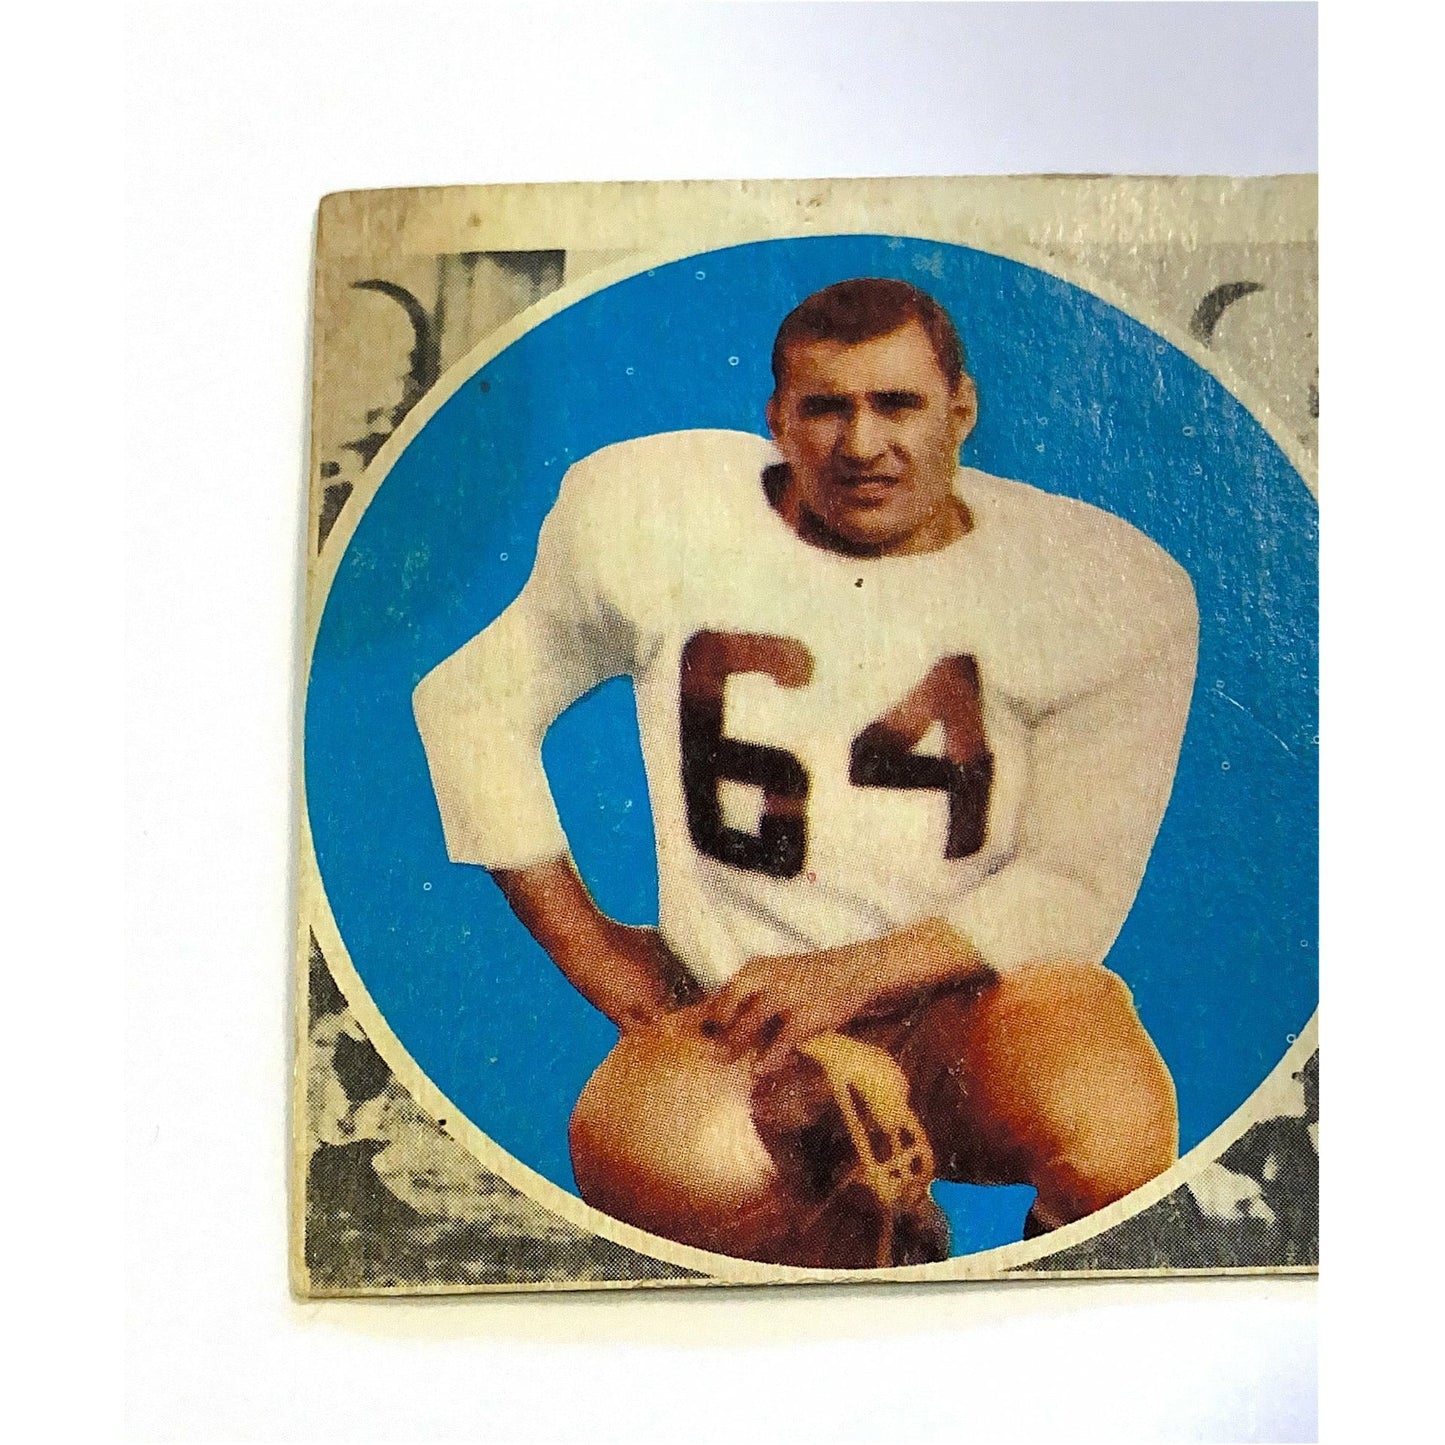 1960 Topps CFL Mike Volcan #19 *Funnies SCRATCHED!